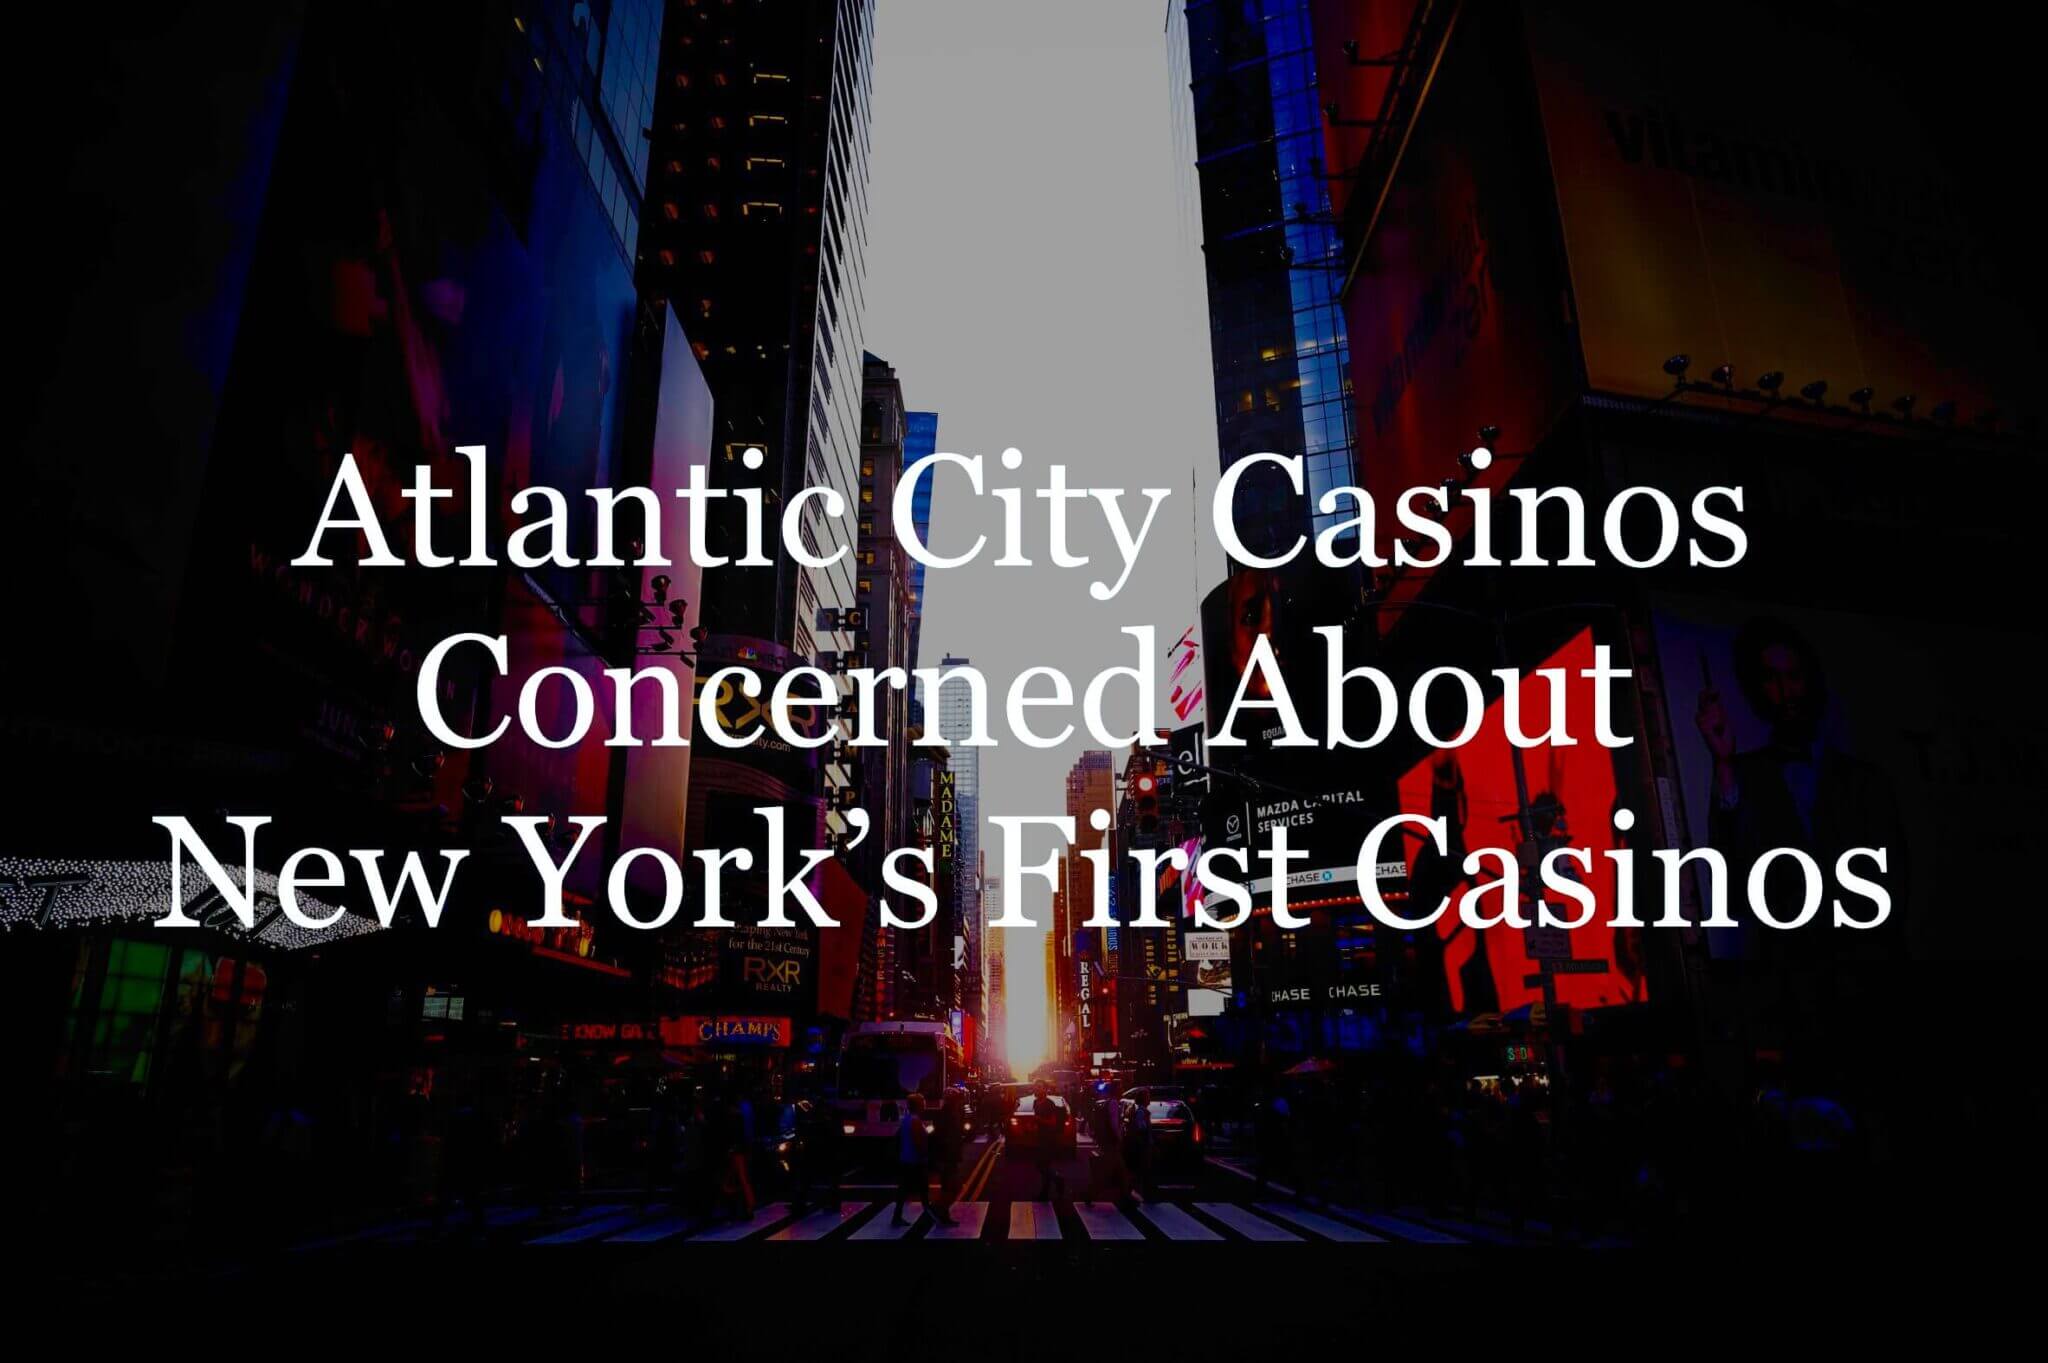 NEW YORK’S FIRST CASINO ALREADY CAUSING CONCERN IN ATLANTIC CITY